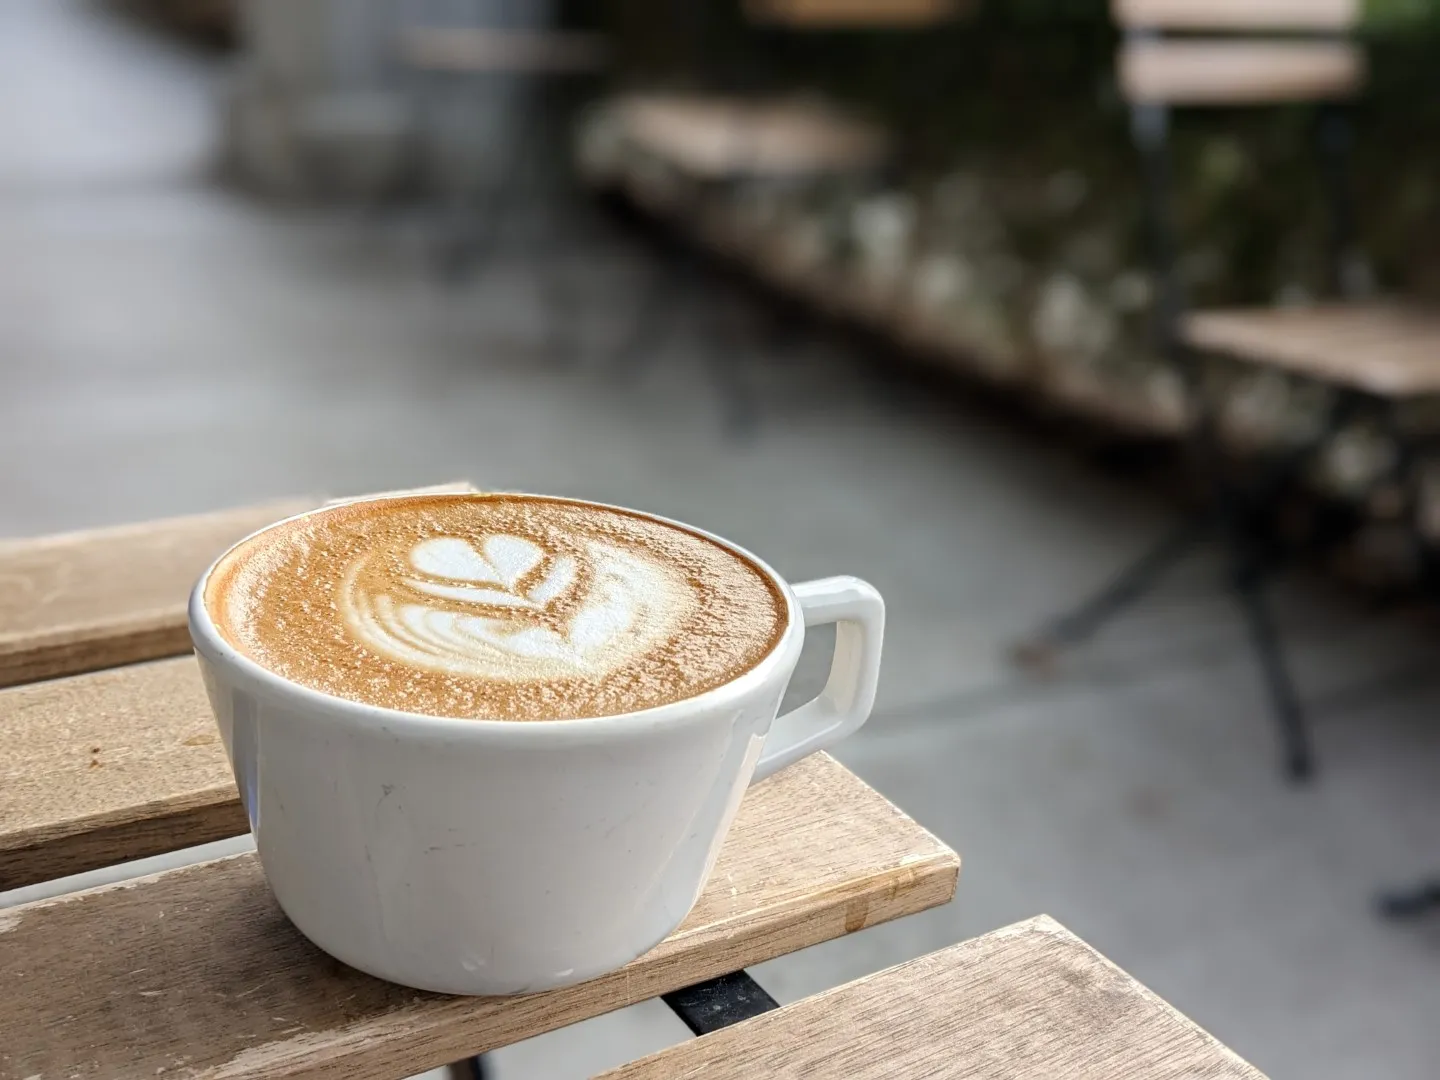 A picture of a beautiful cappuccino with leaf-like latte art sitting on wooden slatted table outside